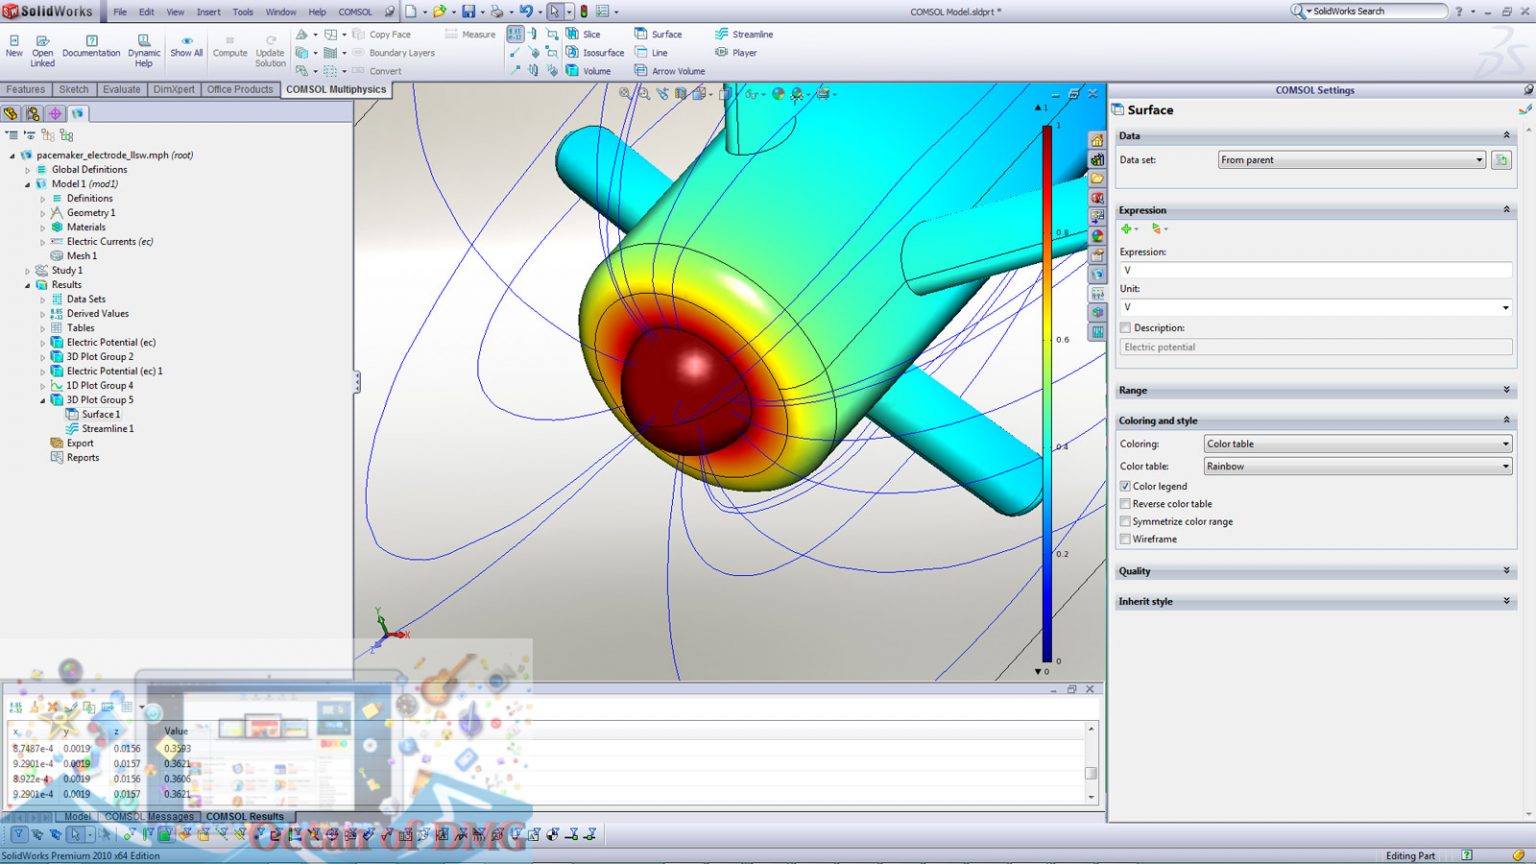 comsol multiphysics mac free download